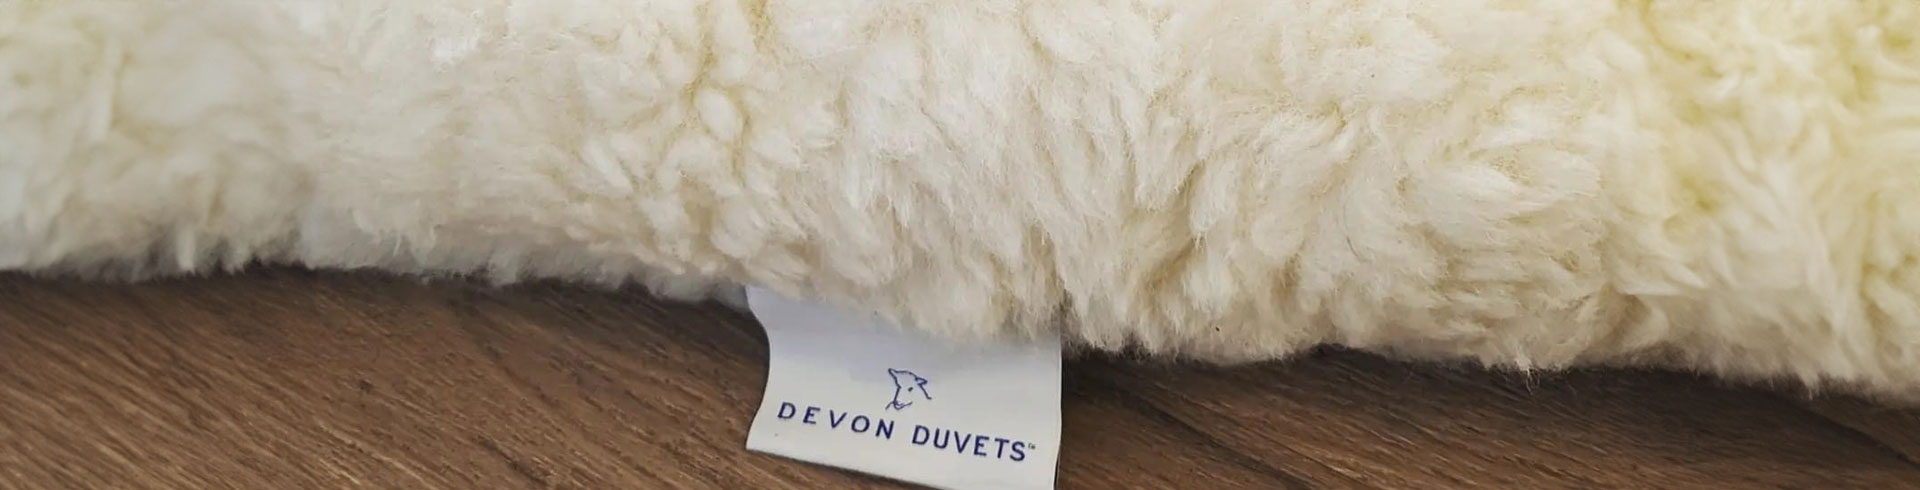 Signature Devon Duvets label, symbolising handcrafted quality and authenticity.